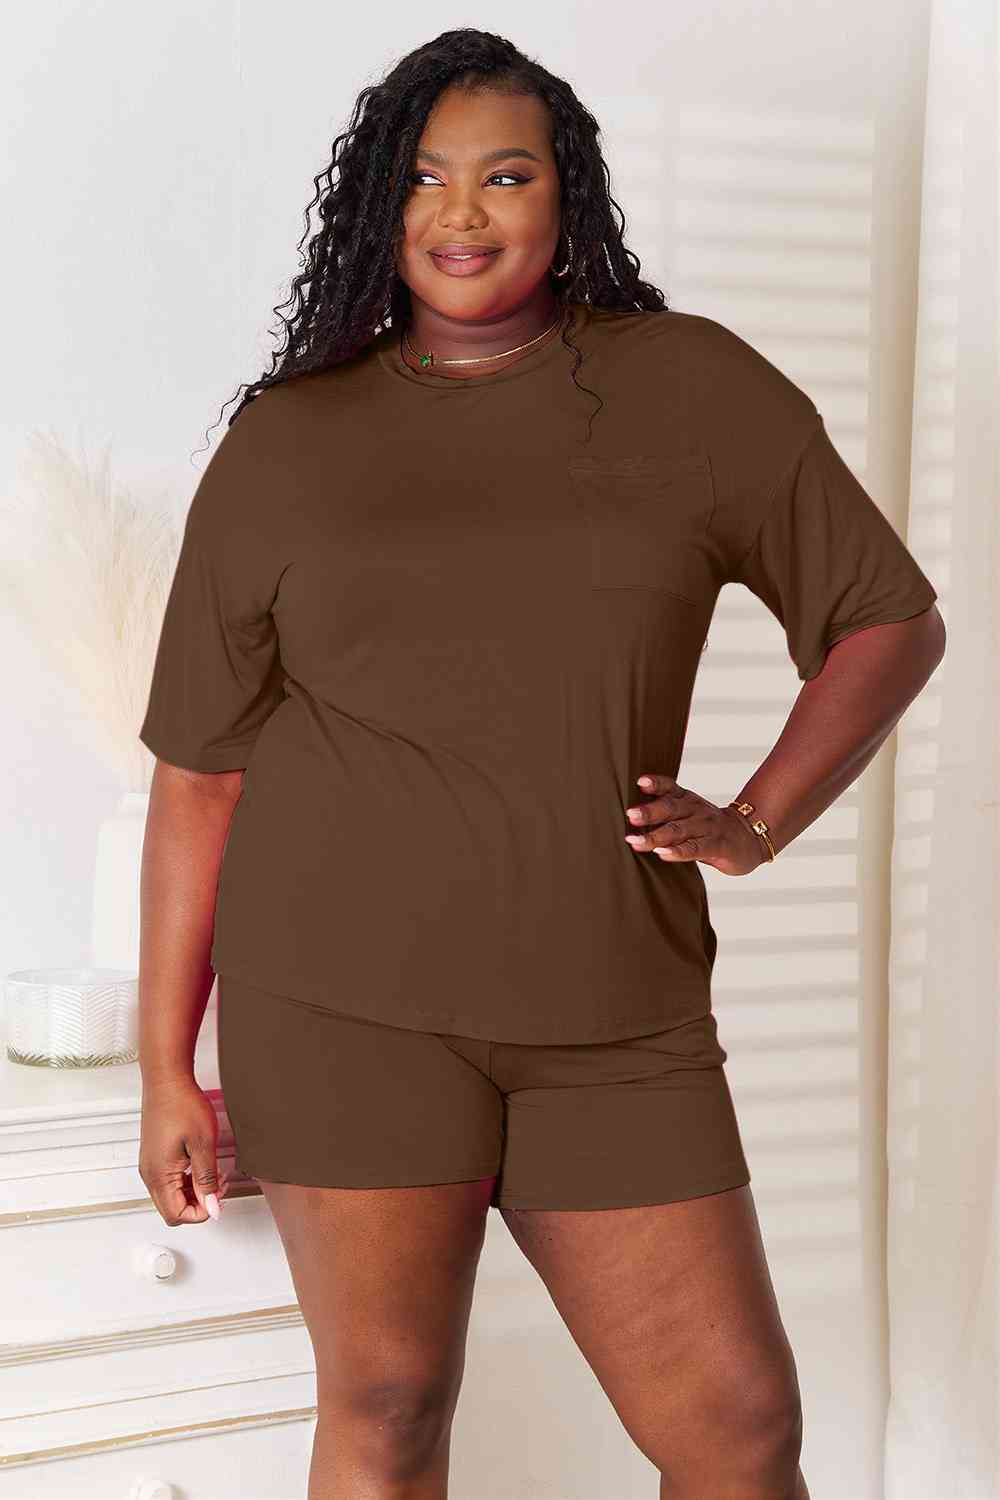 Soft Rayon Half Sleeve Top and Shorts Set - Chocolate / S - Camis & Tops - Outfit Sets - 11 - 2024